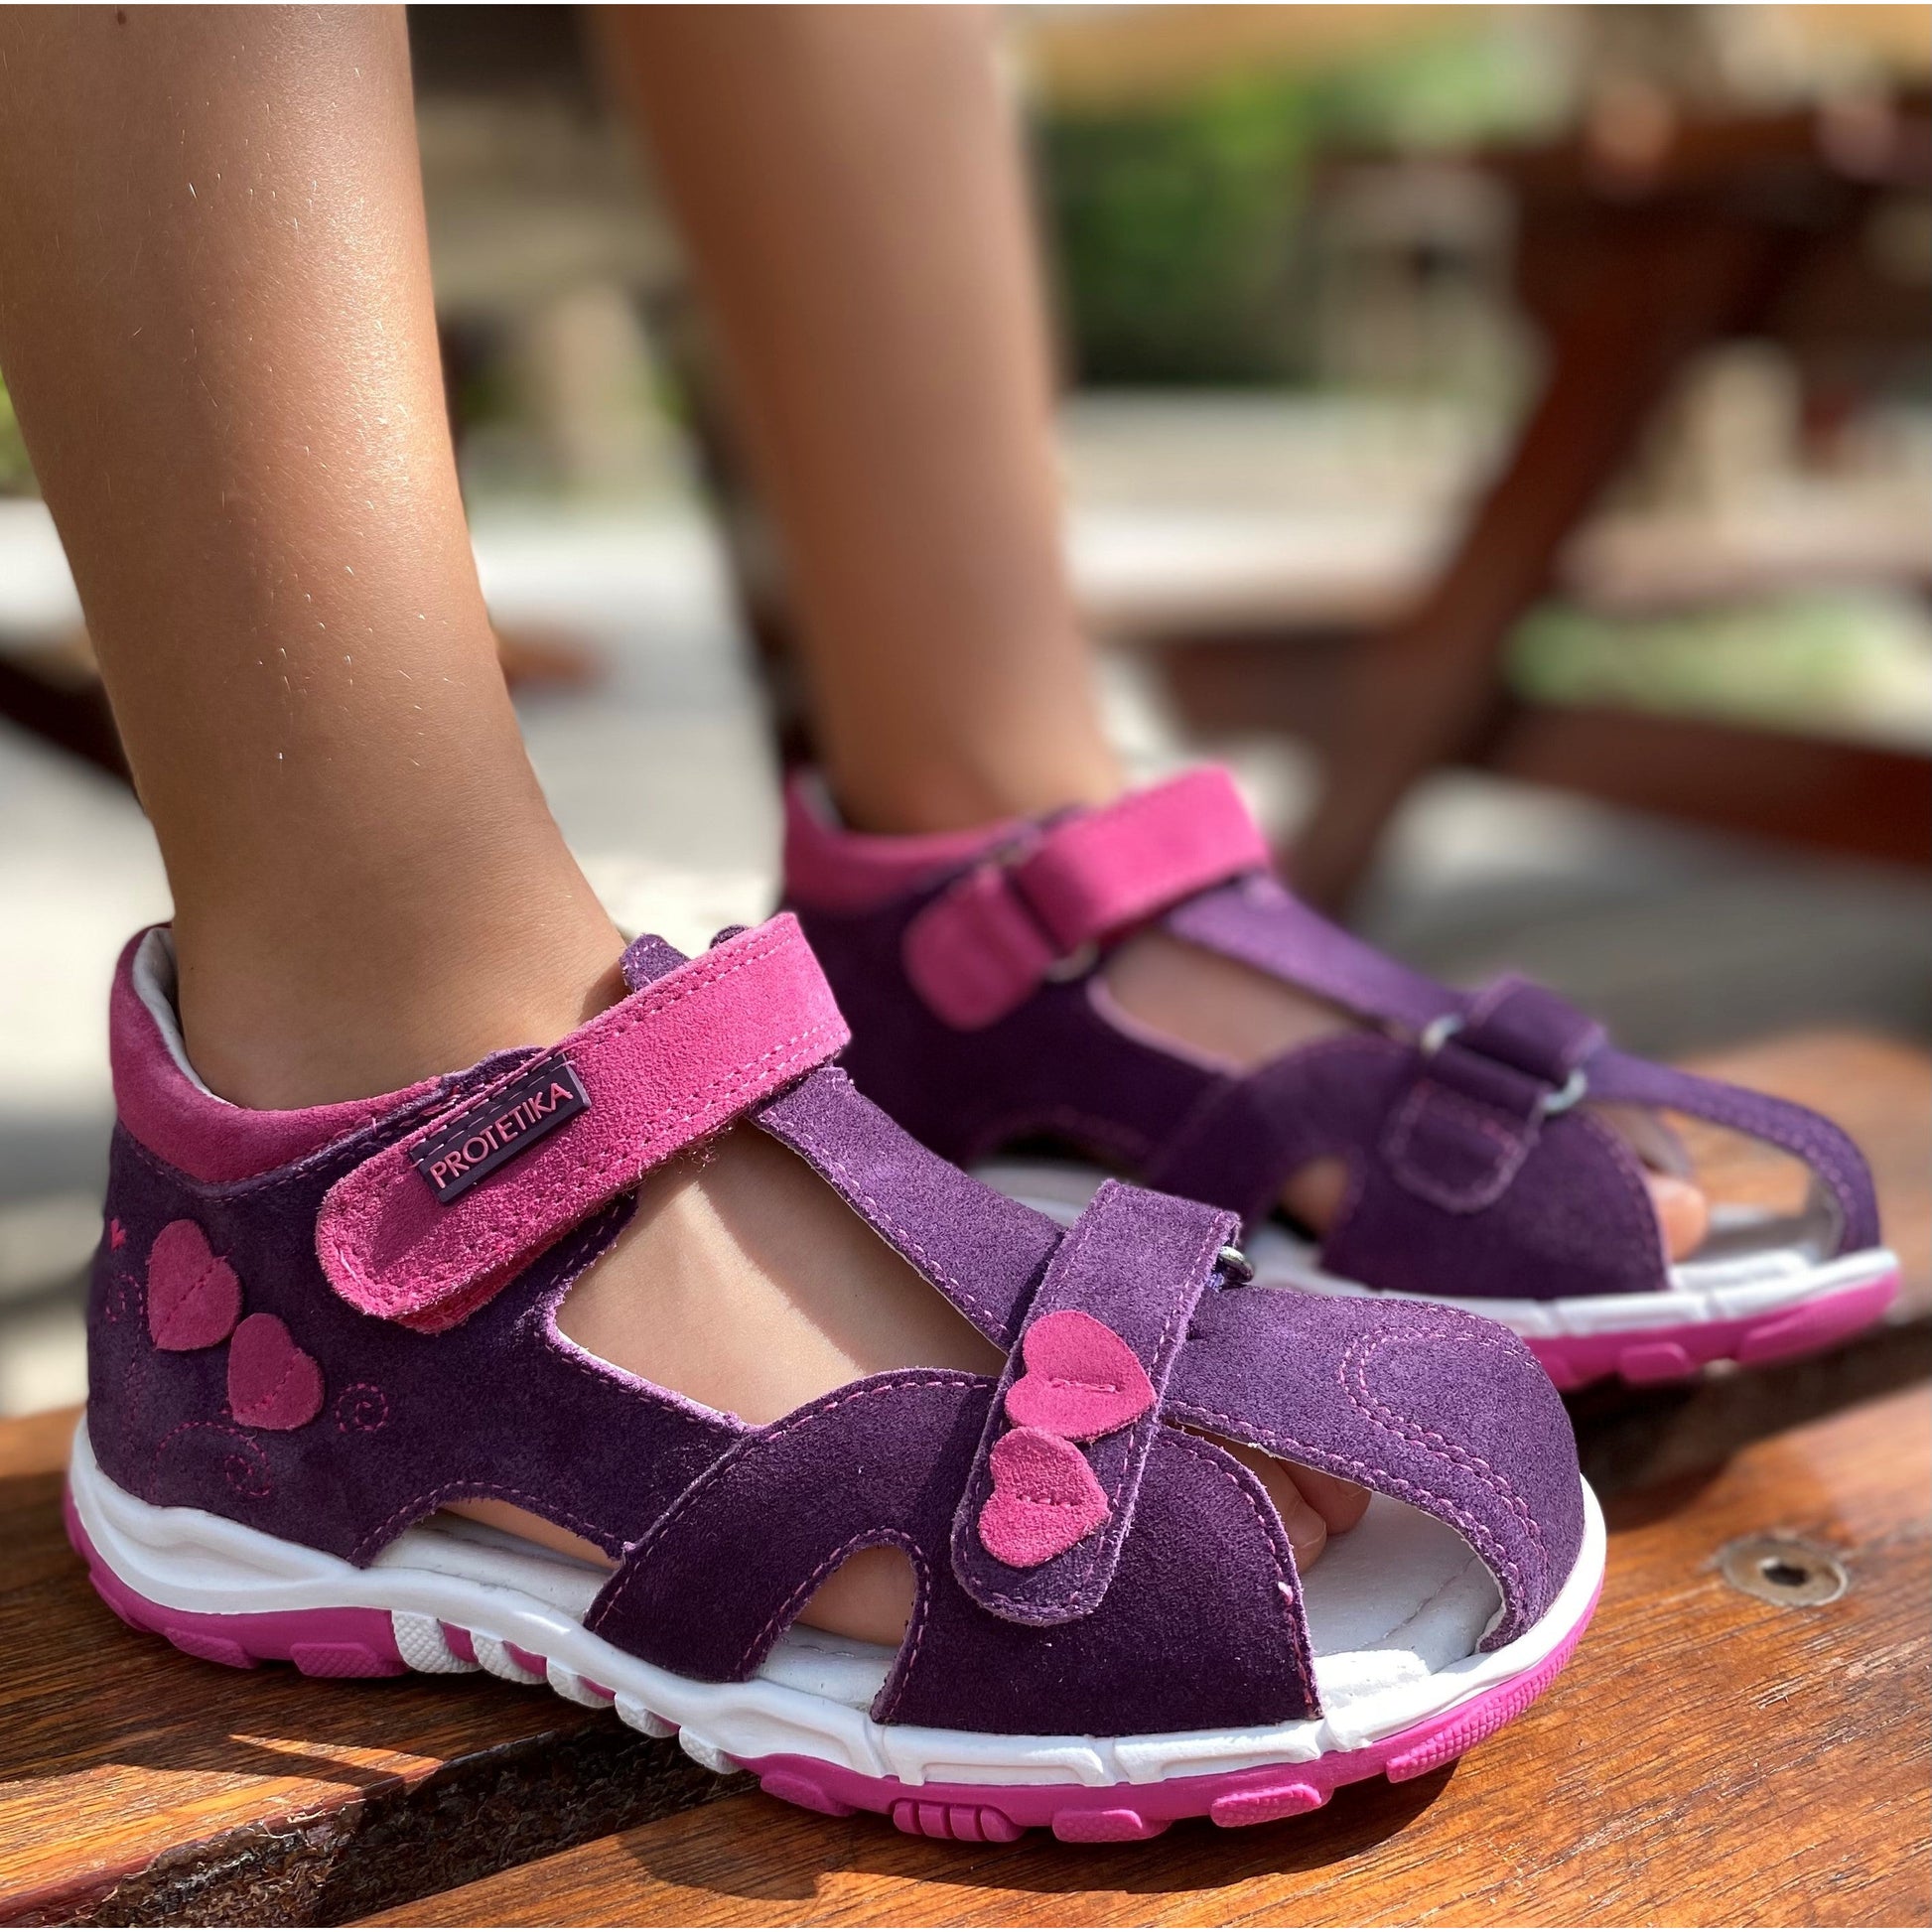 Purple girls sandals by Protetika is an every day shoe as well as for festive occasions.